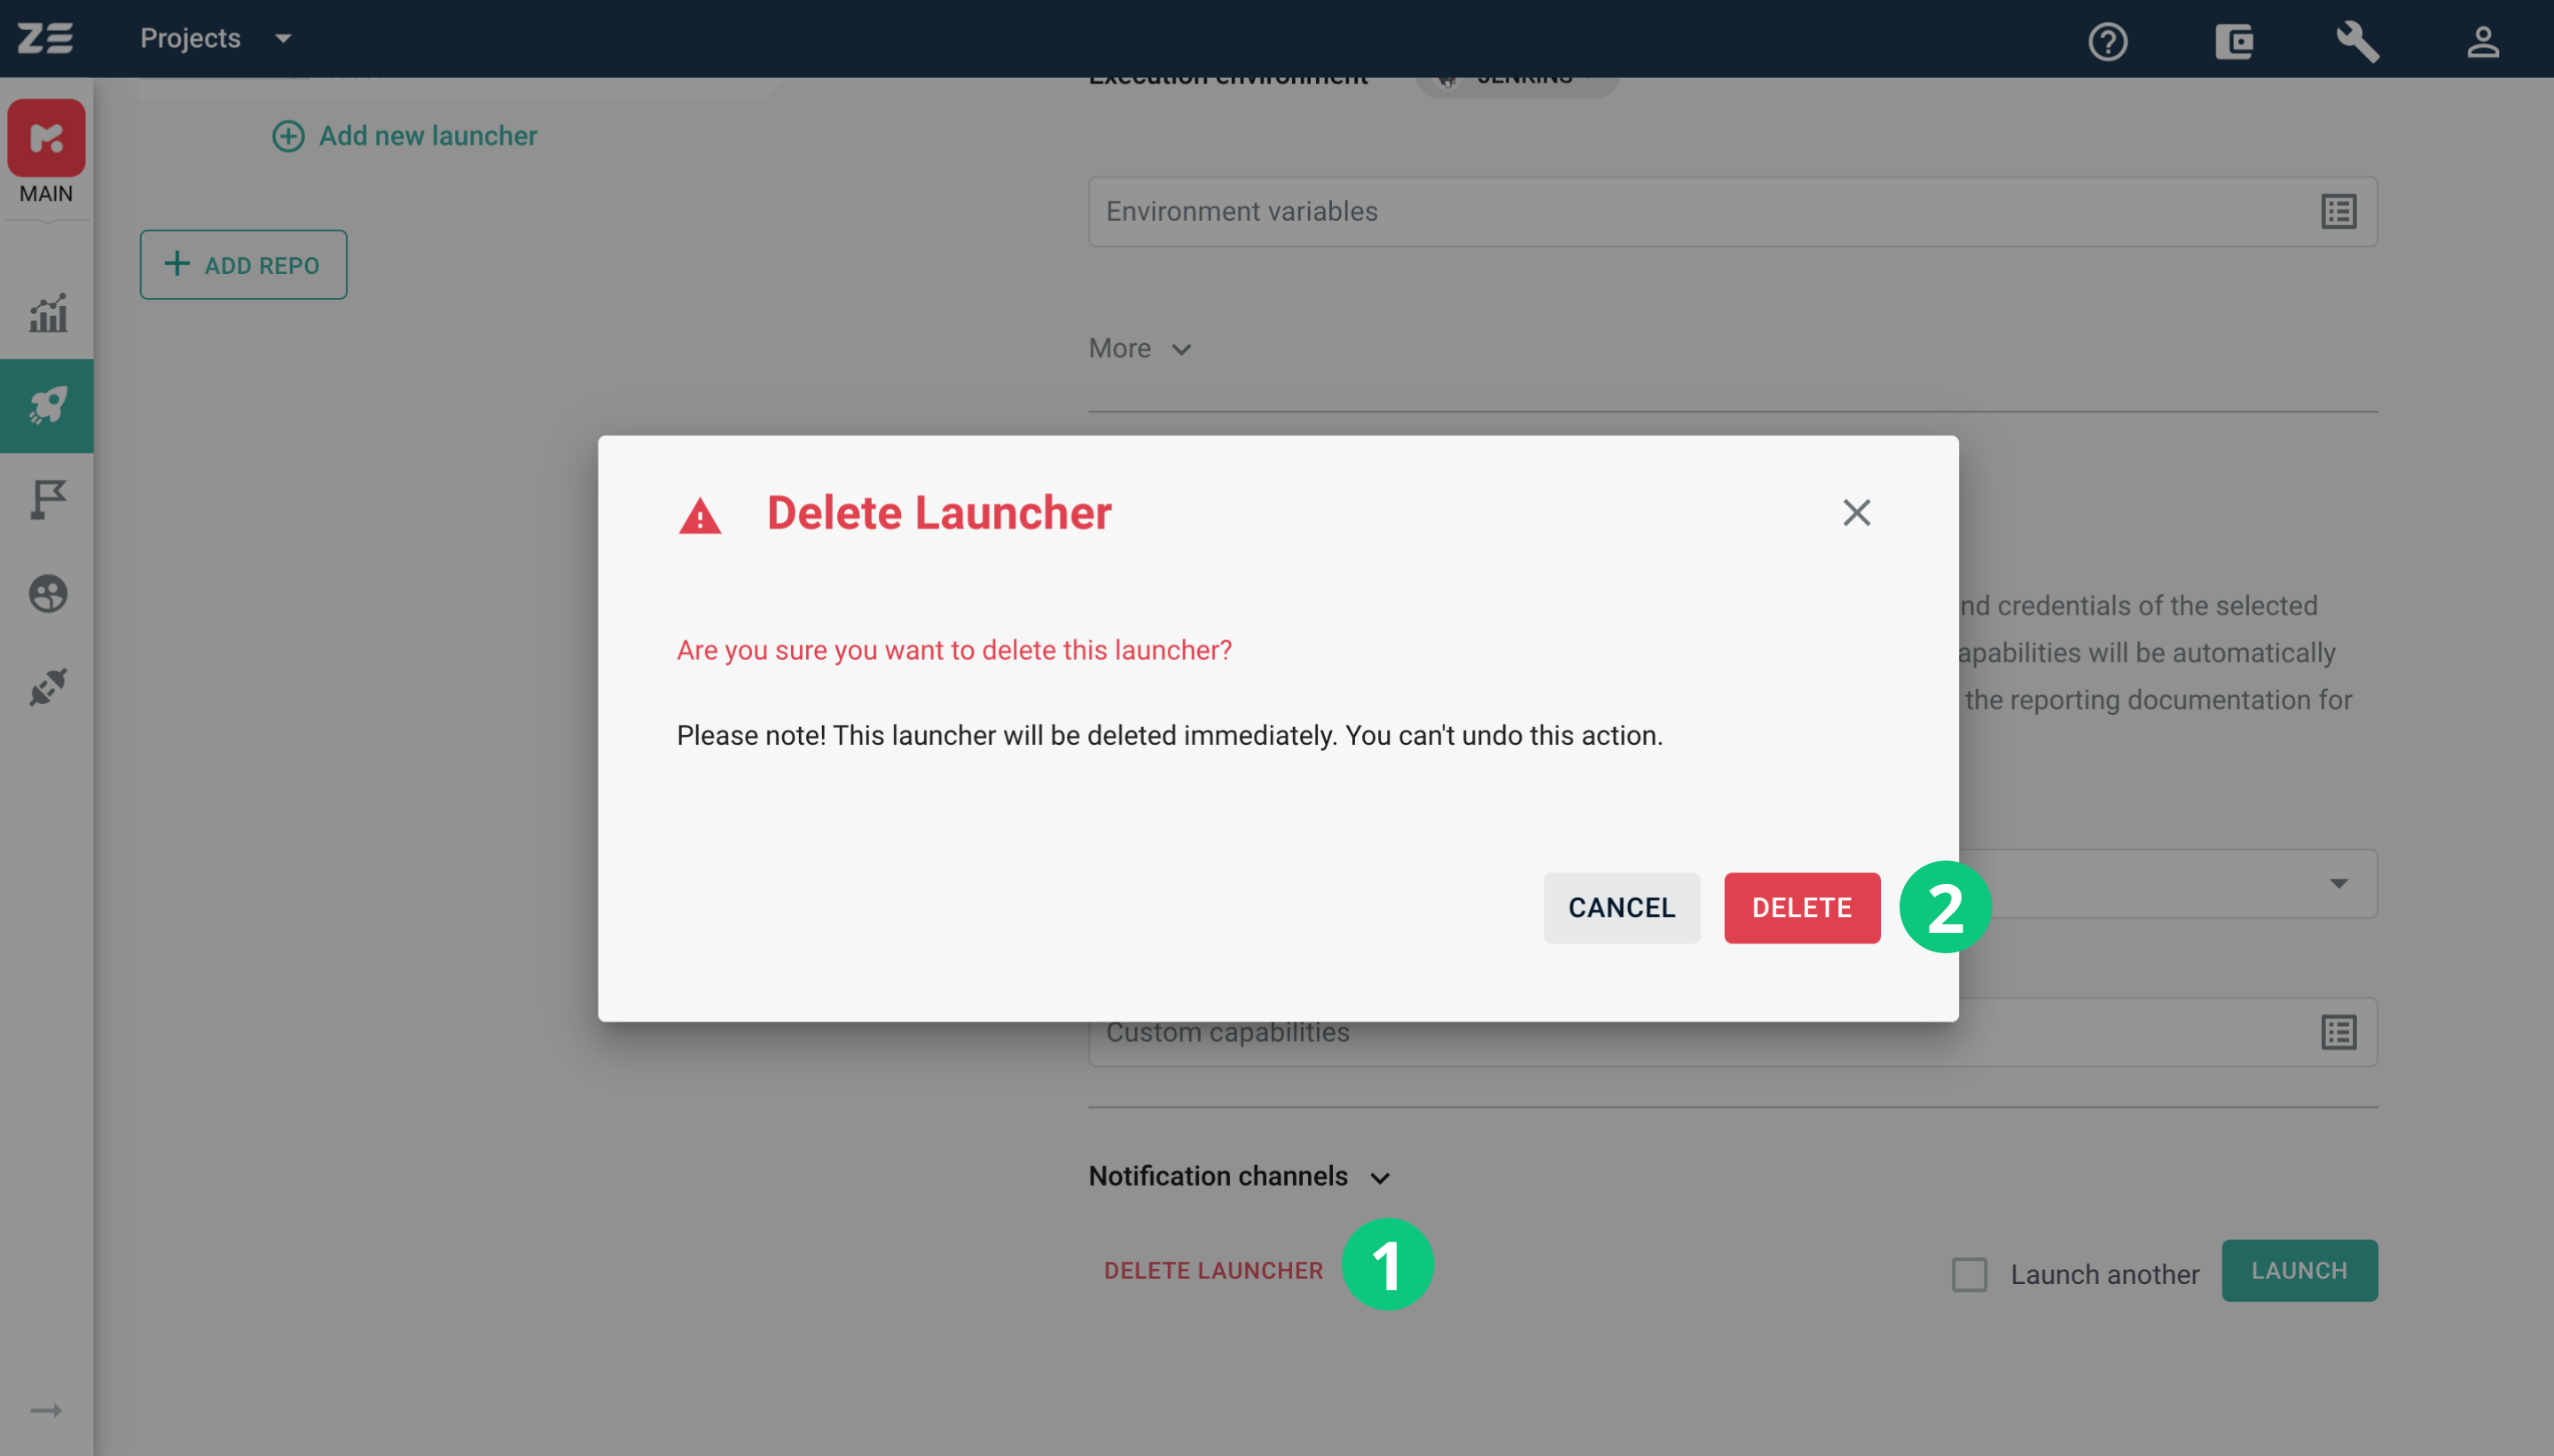 Deleting a Launcher